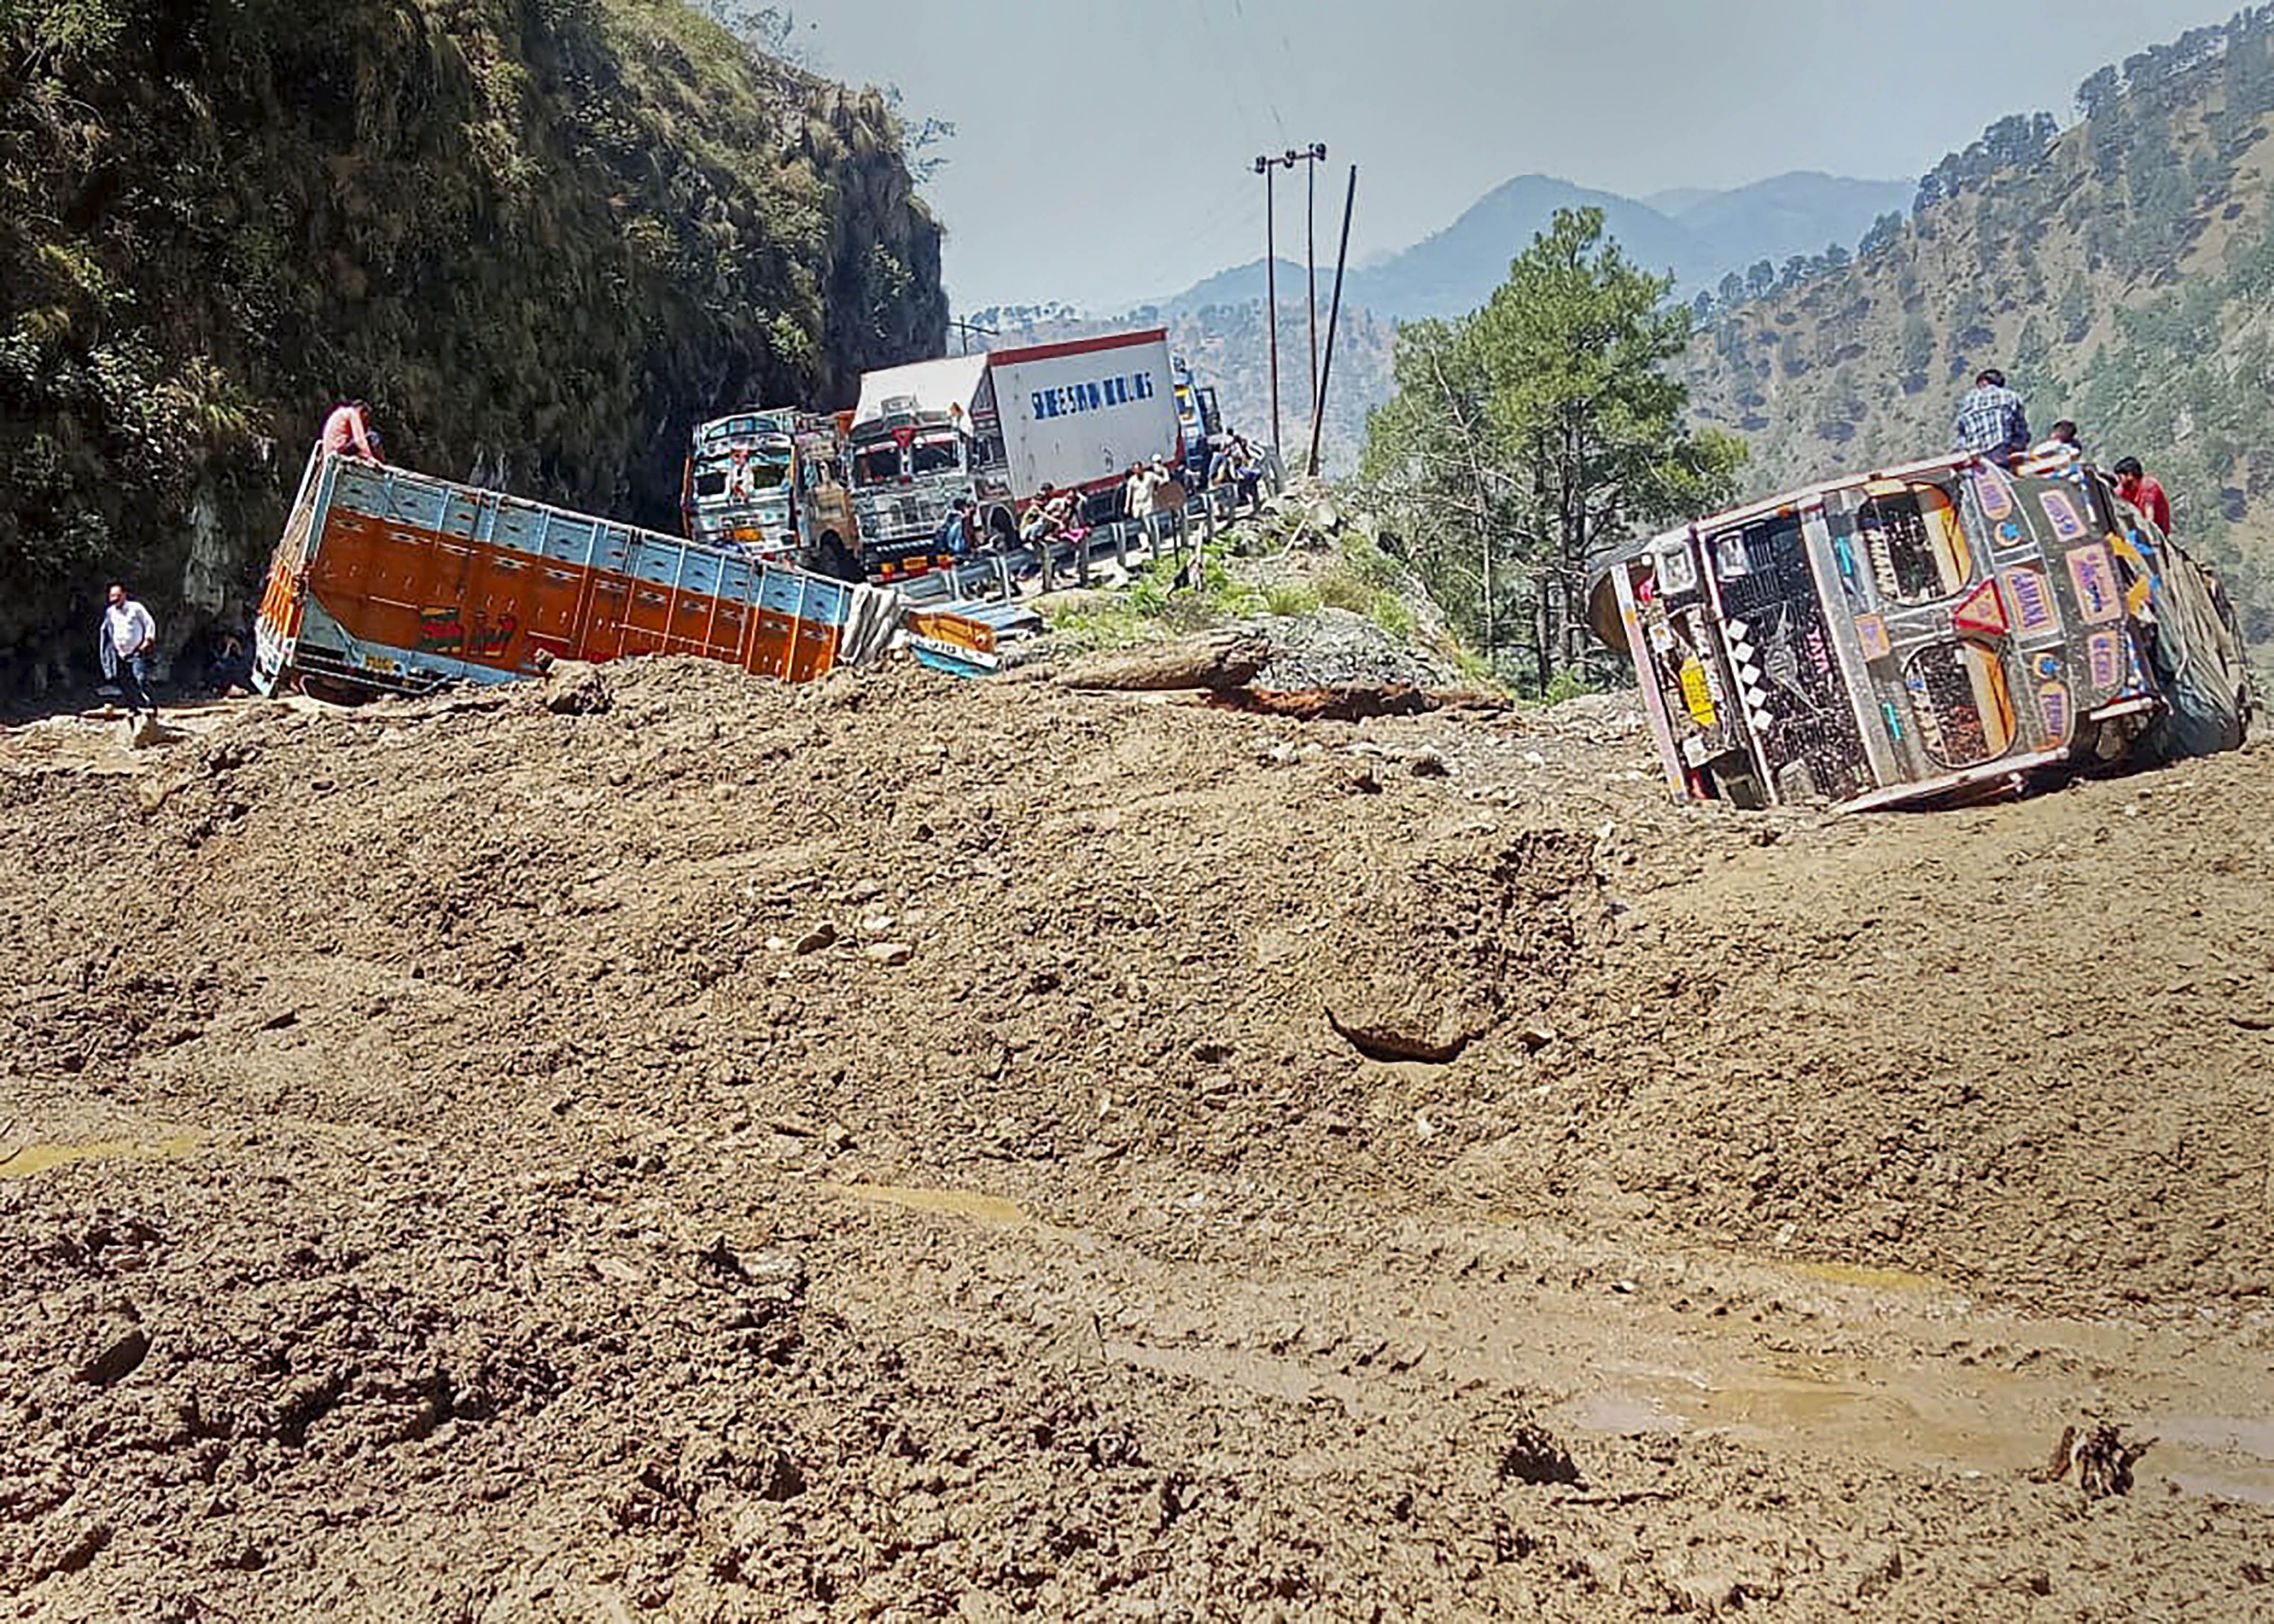 Trucks stranded as the Srinagar-Jammu National Highway was blocked after landslide due to rains, in Banihal sector, Thursday, June 23, 2022. (PTI Photo)